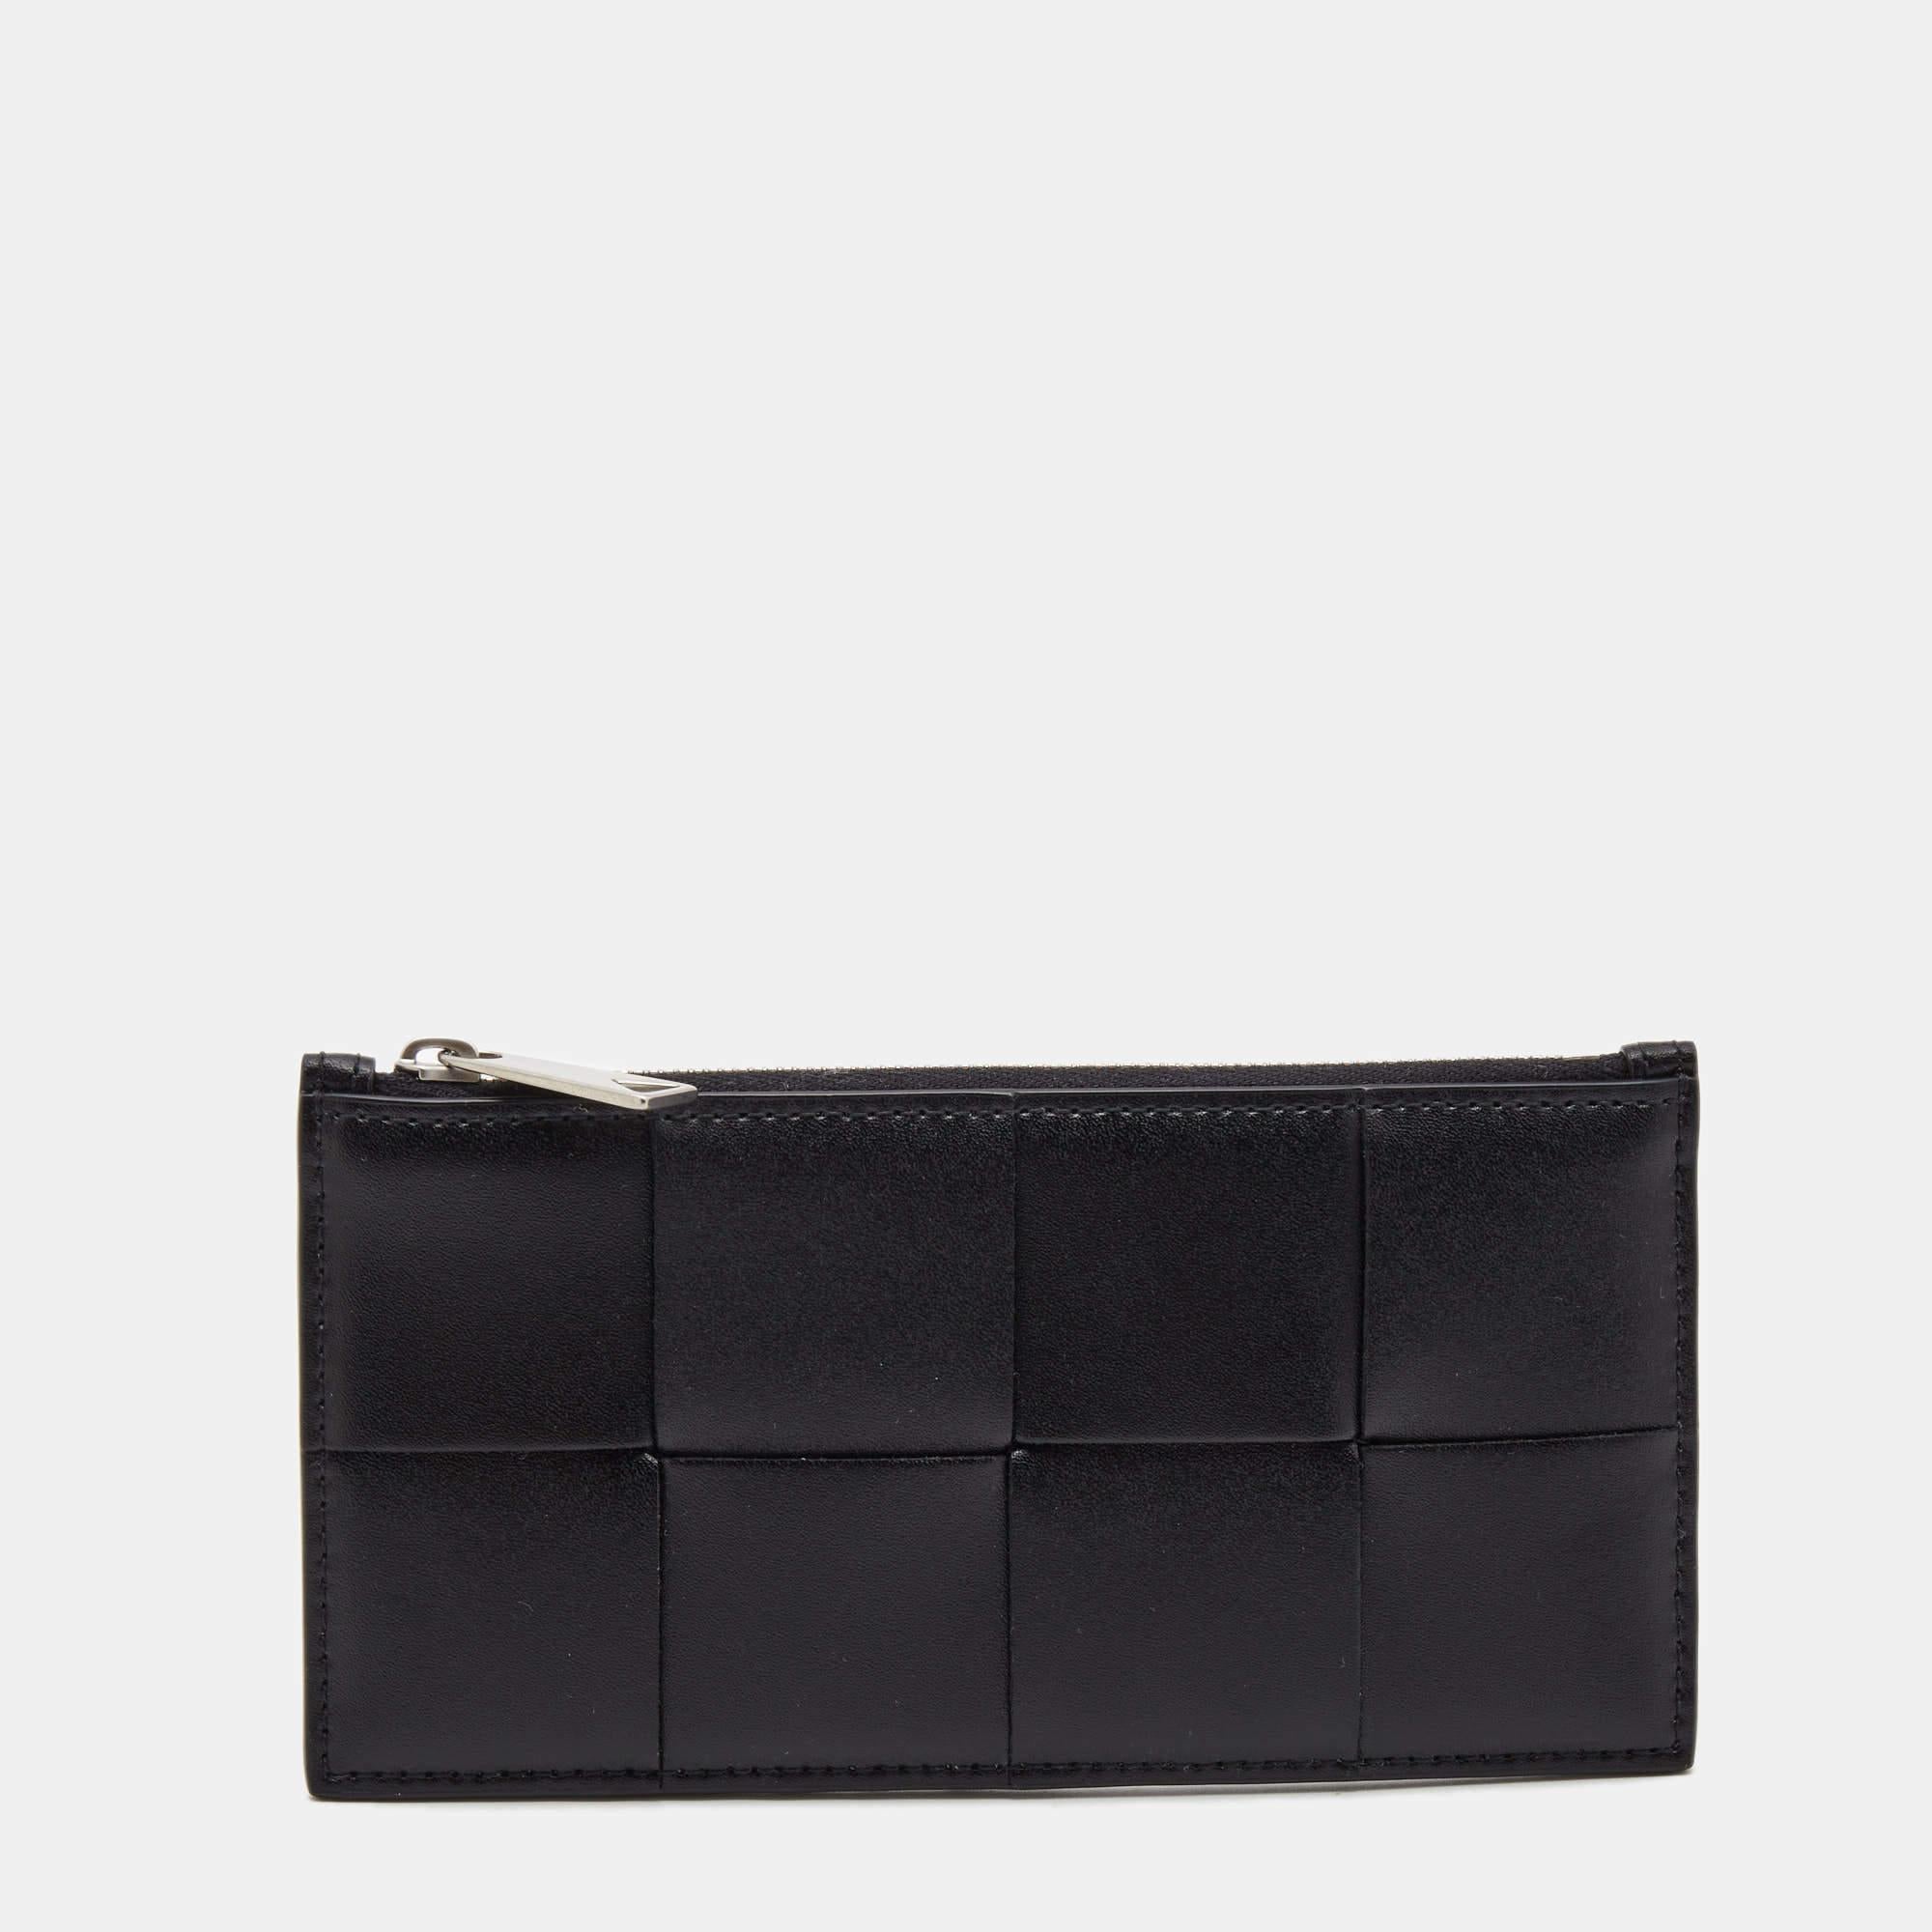 Crafted out of quality leather in their signature Intrecciato pattern, this card-holder by Bottega Veneta comes equipped with multiple slots that will dutifully hold your cards and a zipped compartment. This piece is sleek and can easily slip into